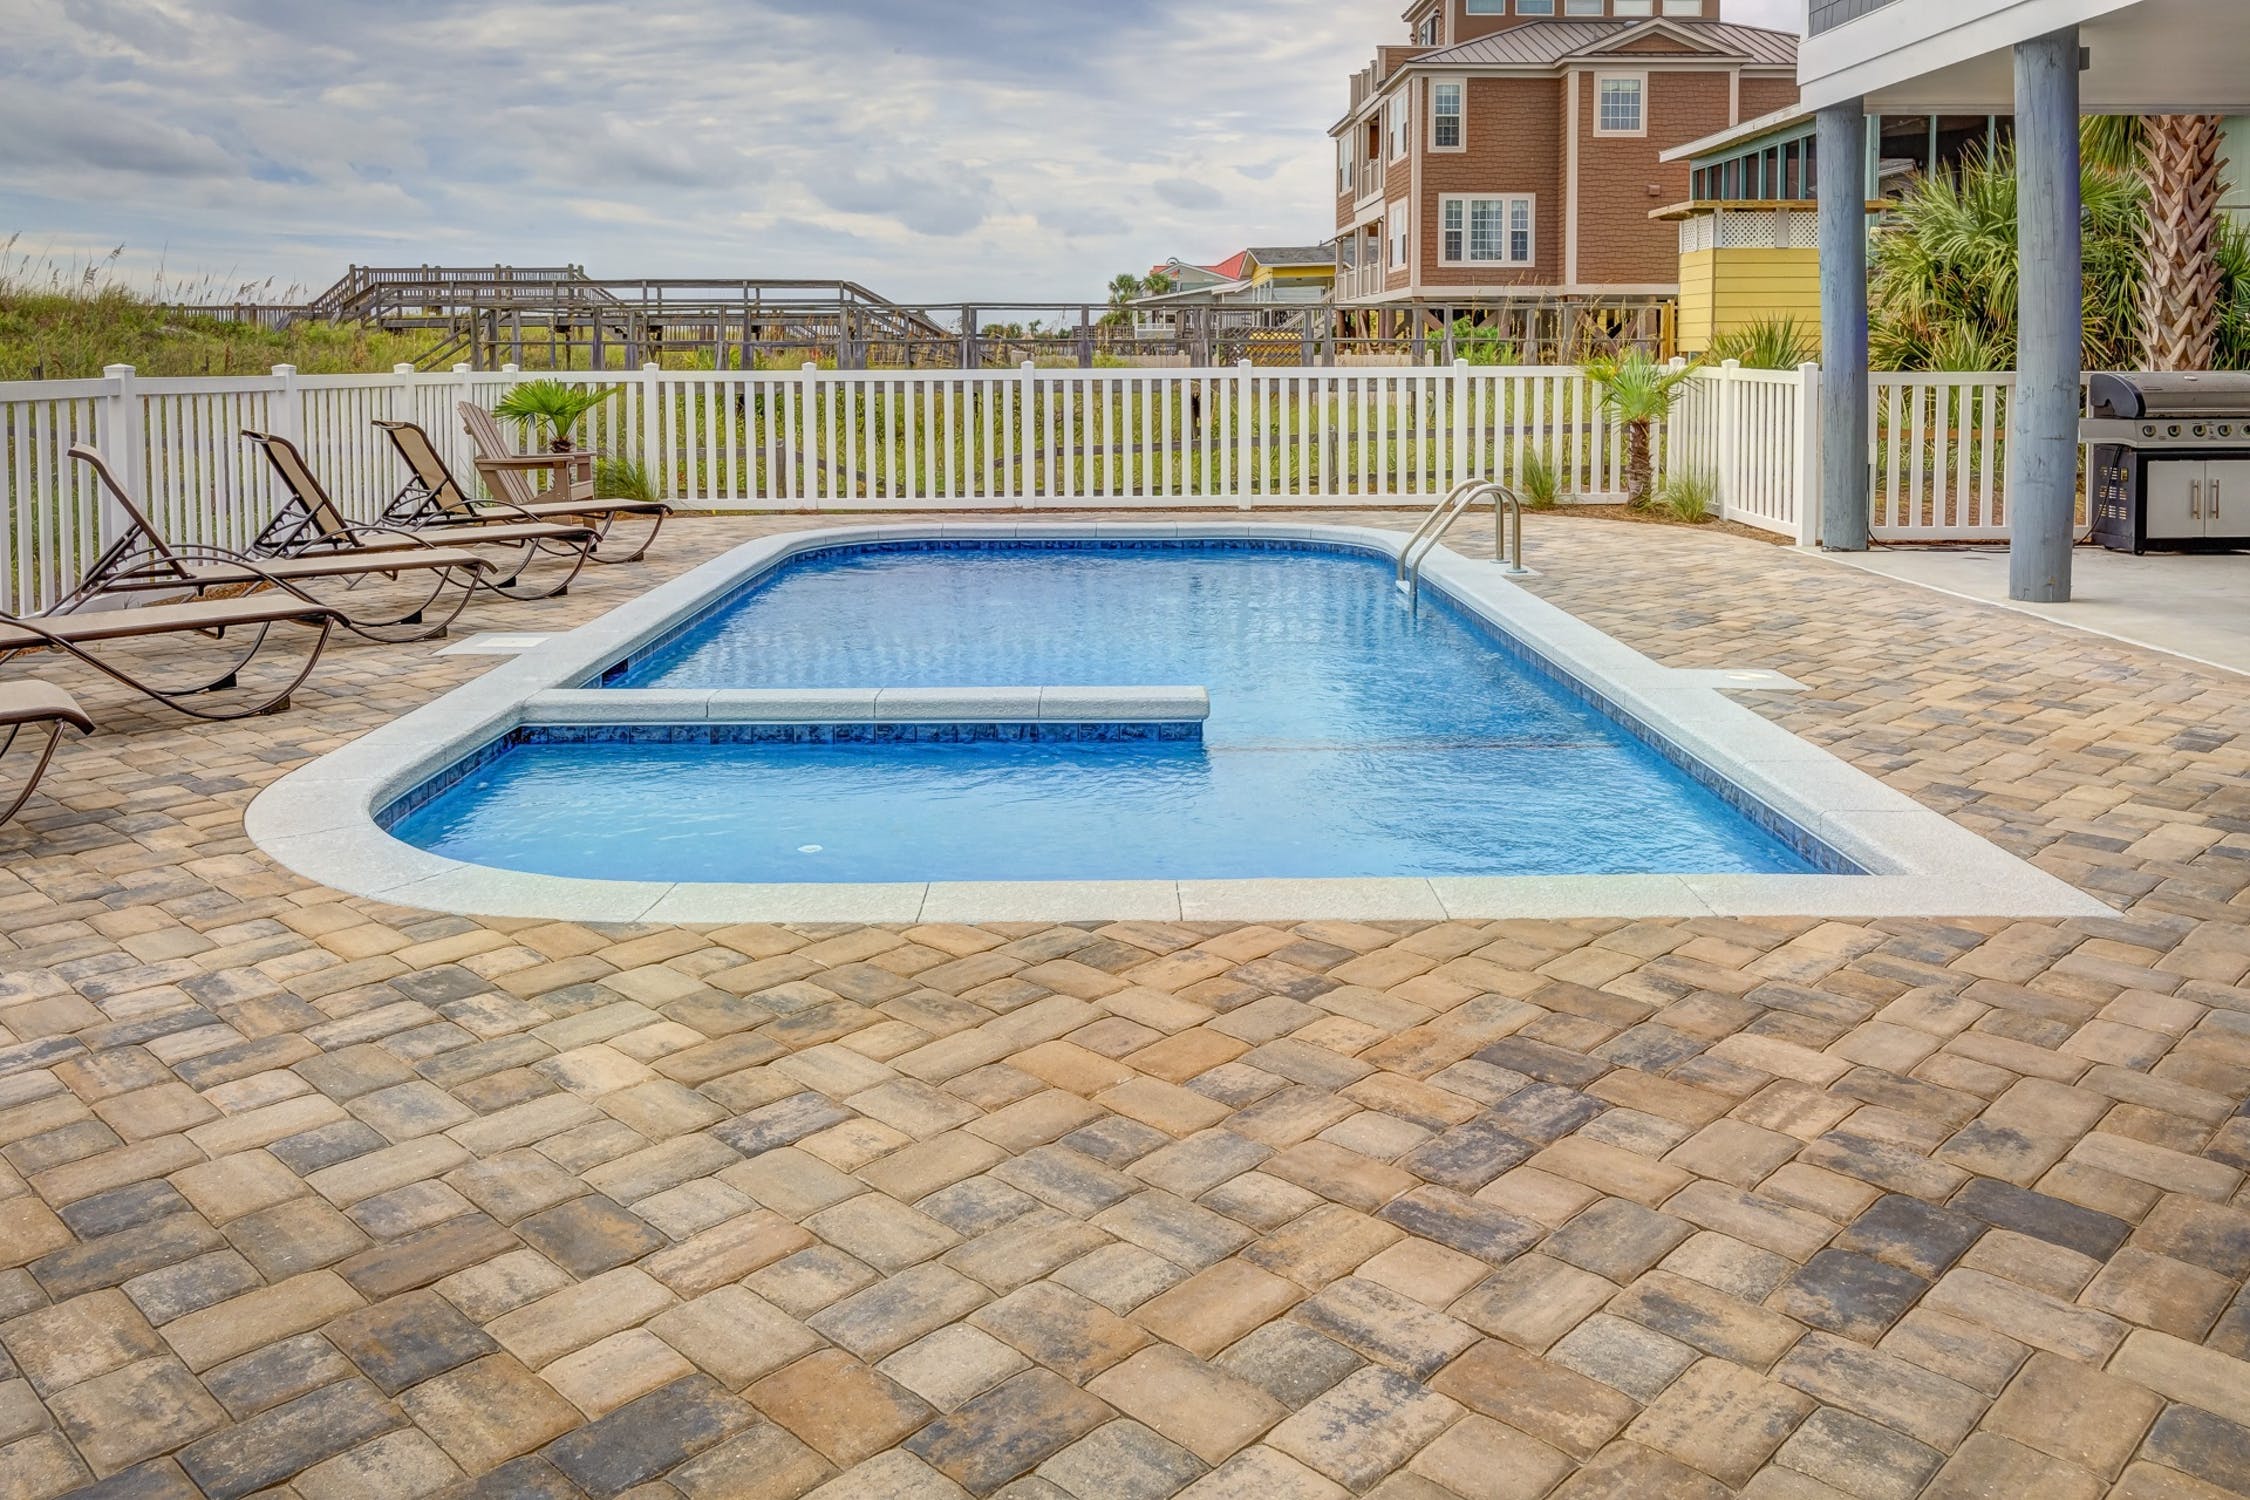 Maintain the Shine and Luster of Your Glass Pool Fencing with These Tips